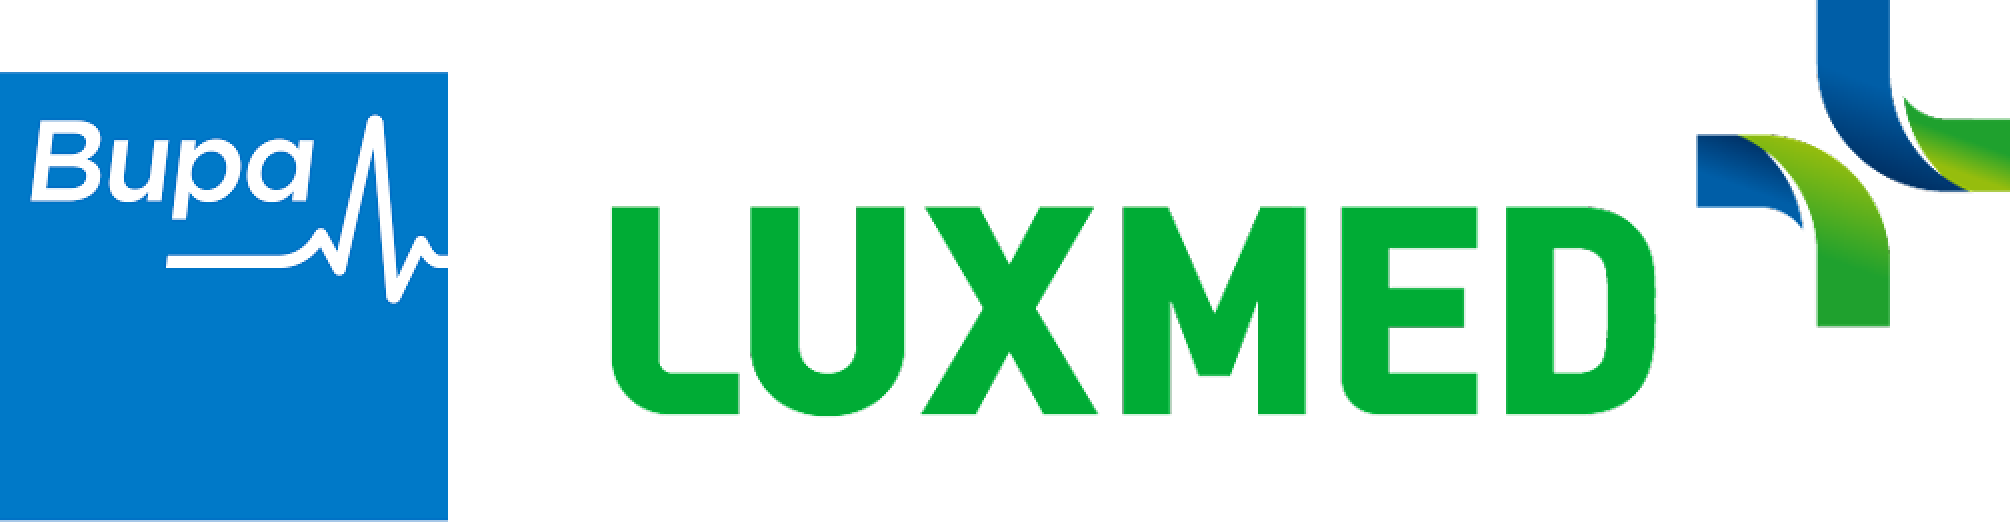 Luxmed, part of BUPA Group